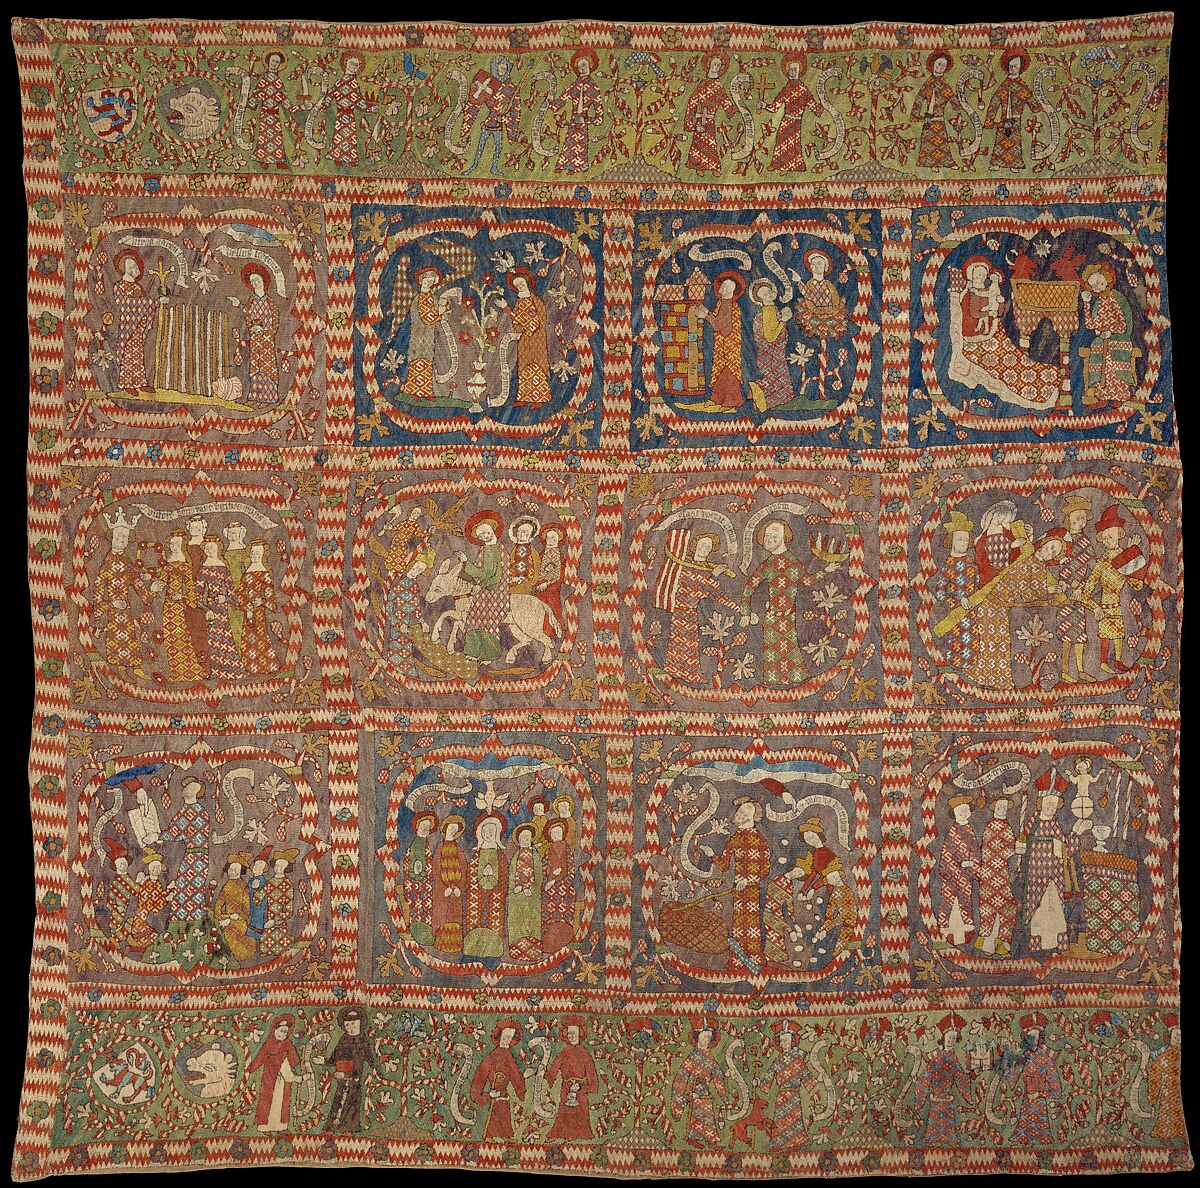 Embroidered Hanging, Silk on linen, painted inscriptions, German 